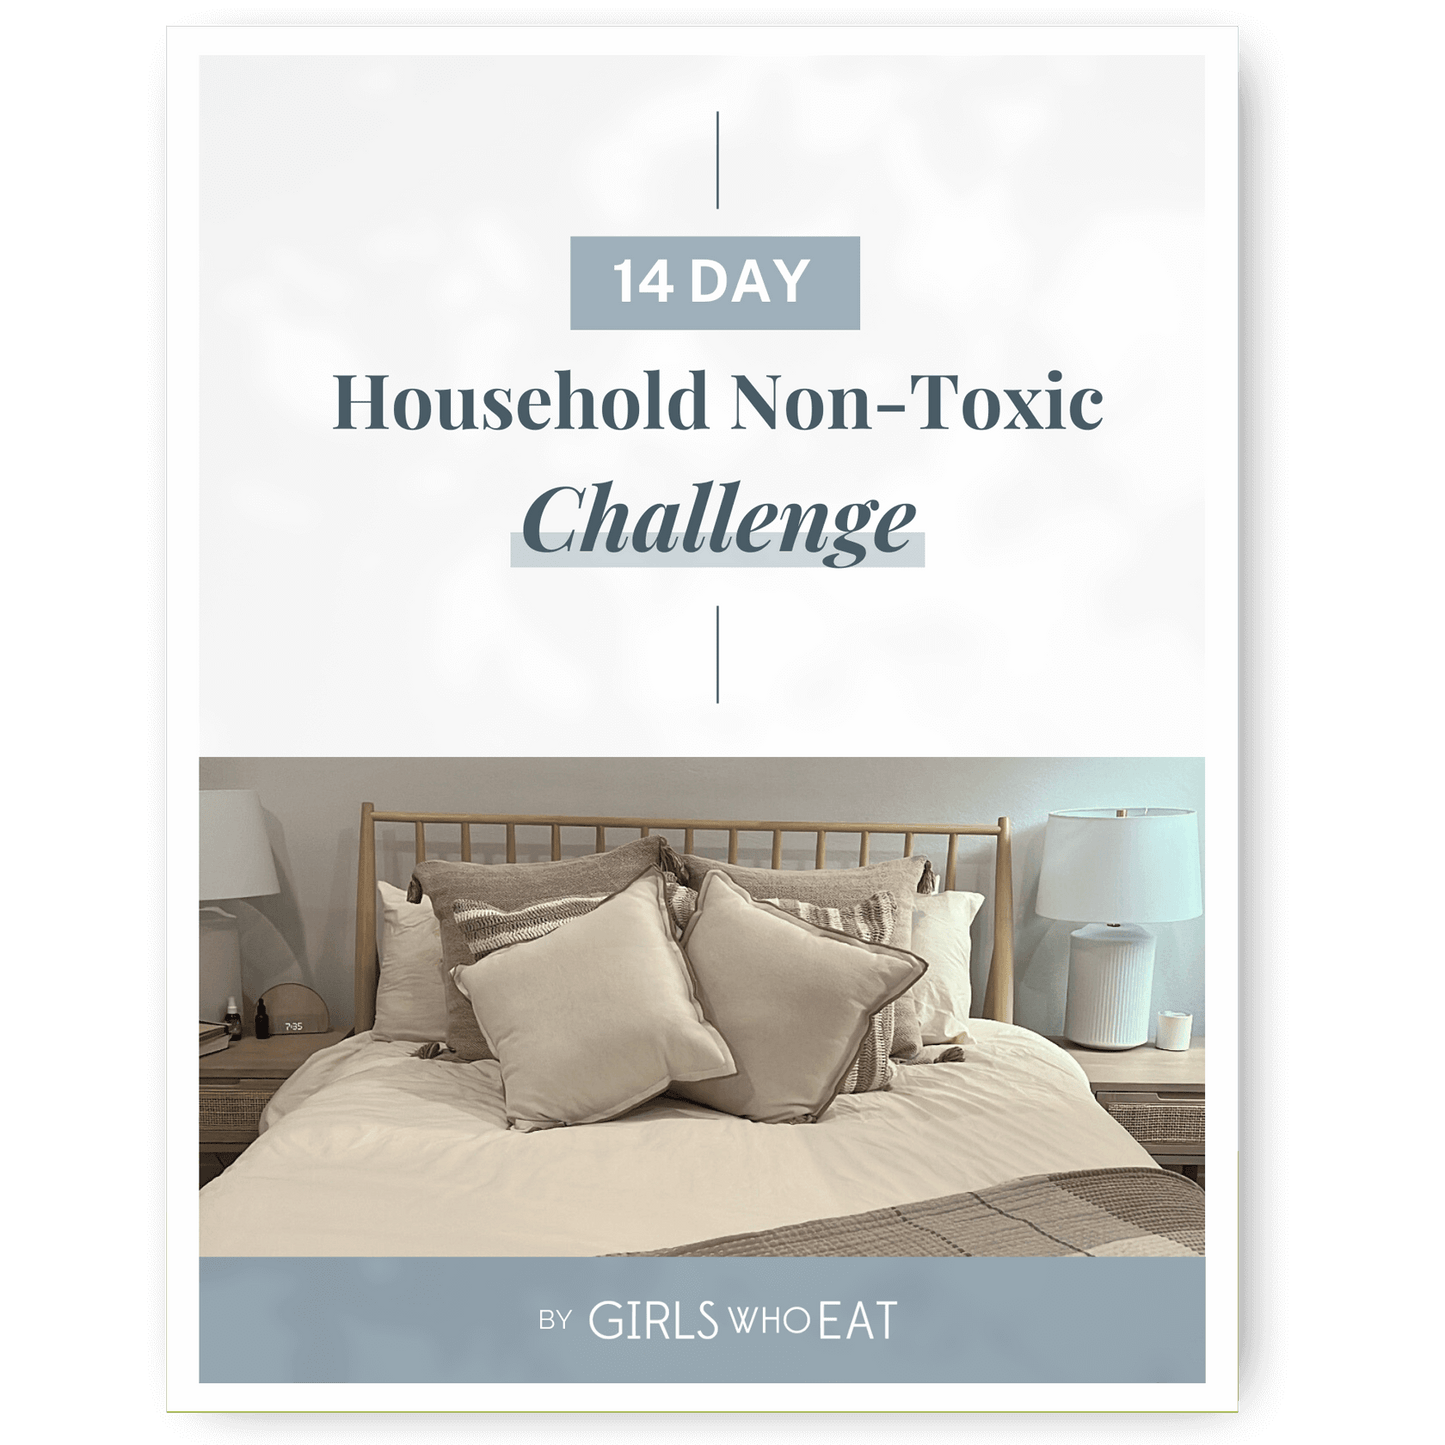 14 Day Non-Toxic Household Challenge